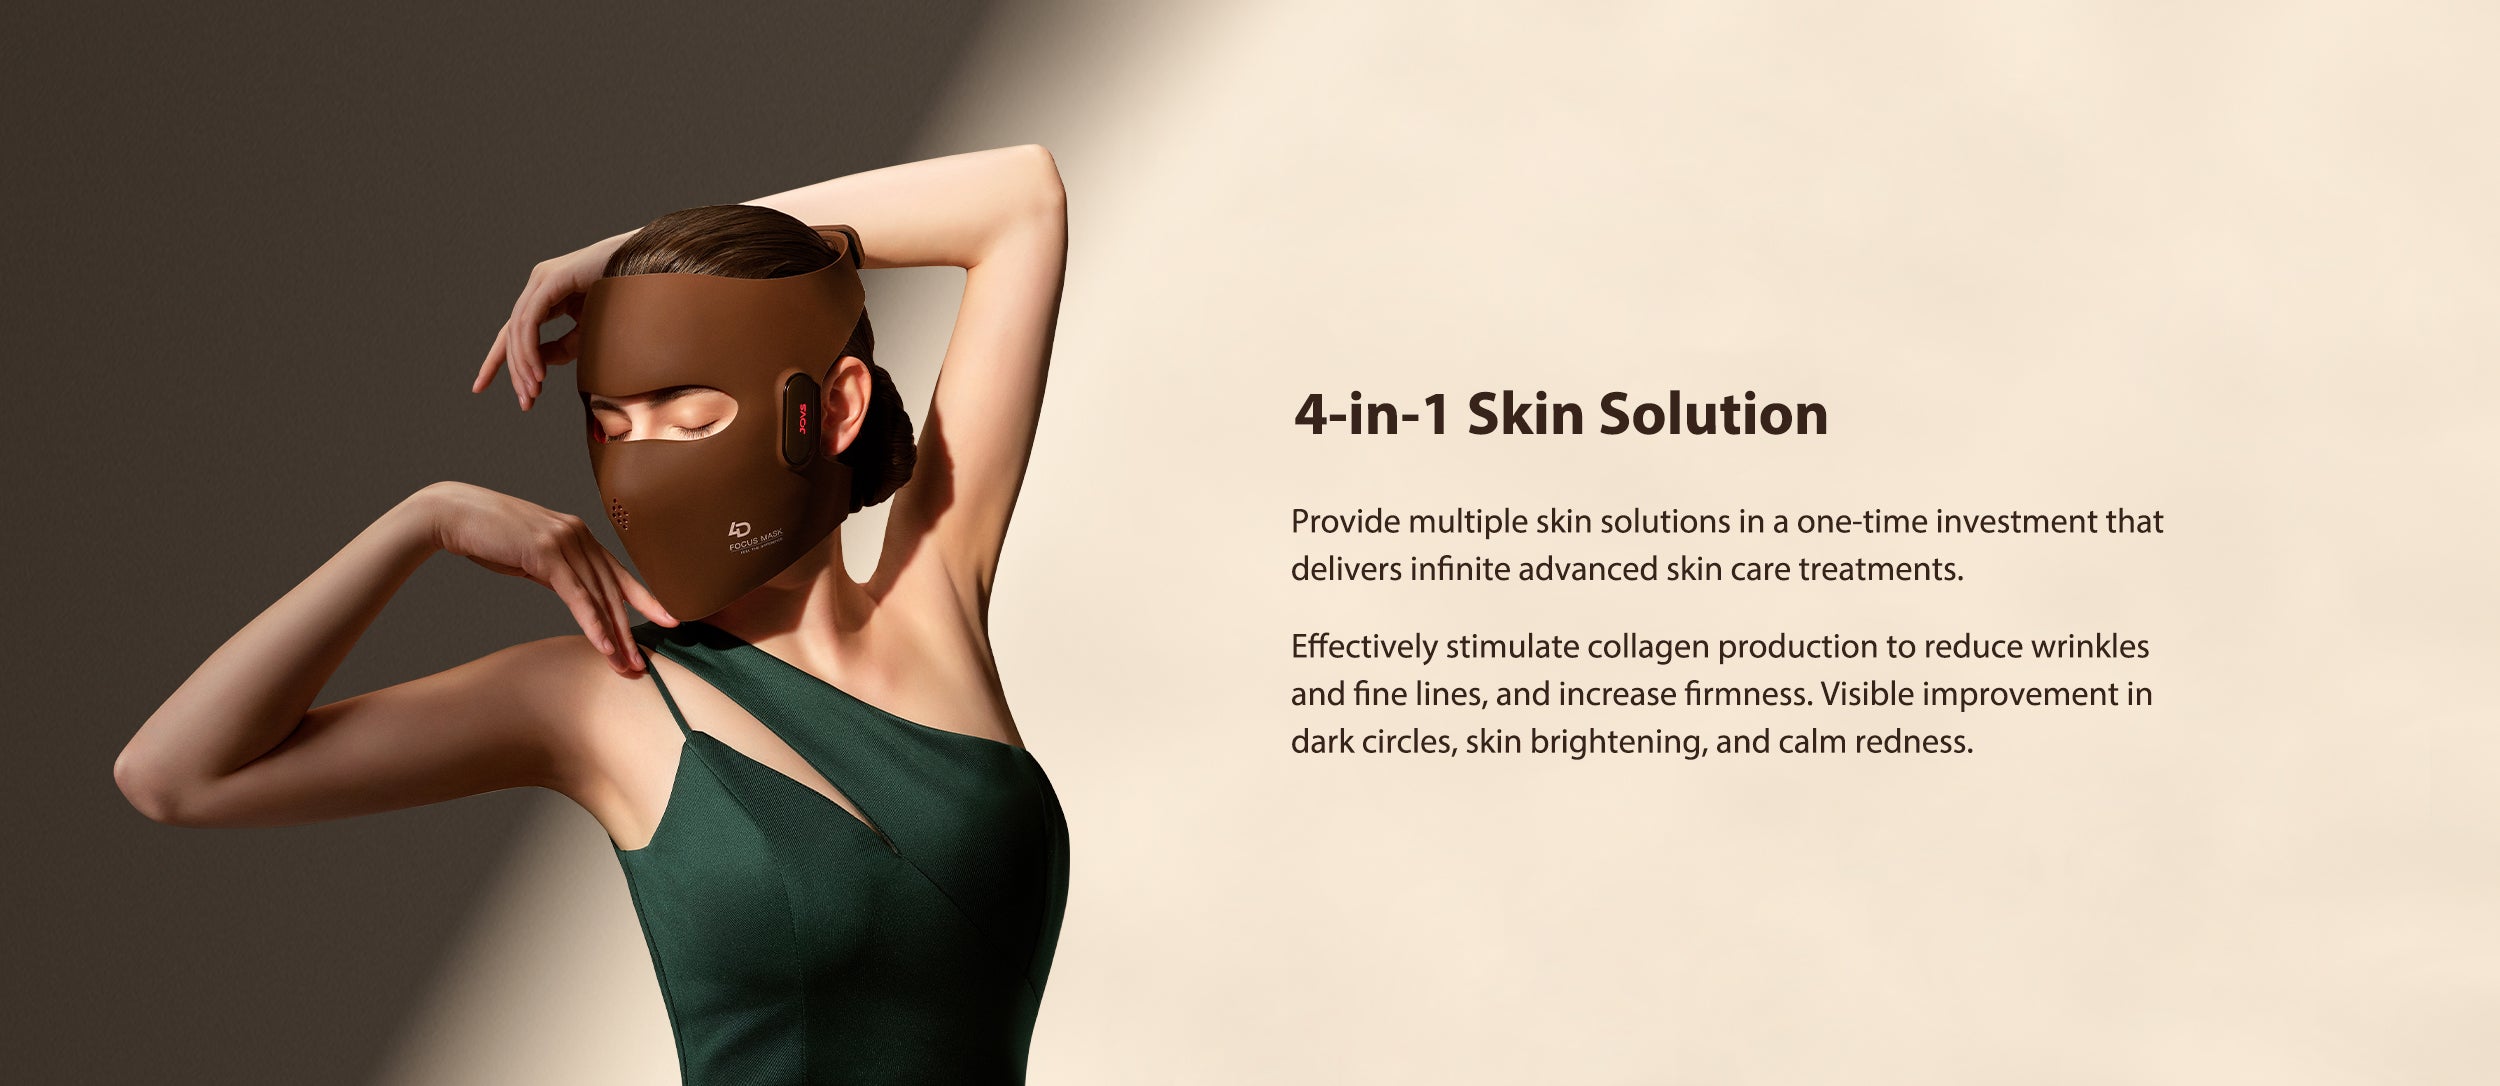 Model wearing JOVS 4D Laser Light Therapy Mask offering a 4-in-1 skin solution for collagen stimulation, wrinkle and fine line reduction, firmness increase, and skin brightening.